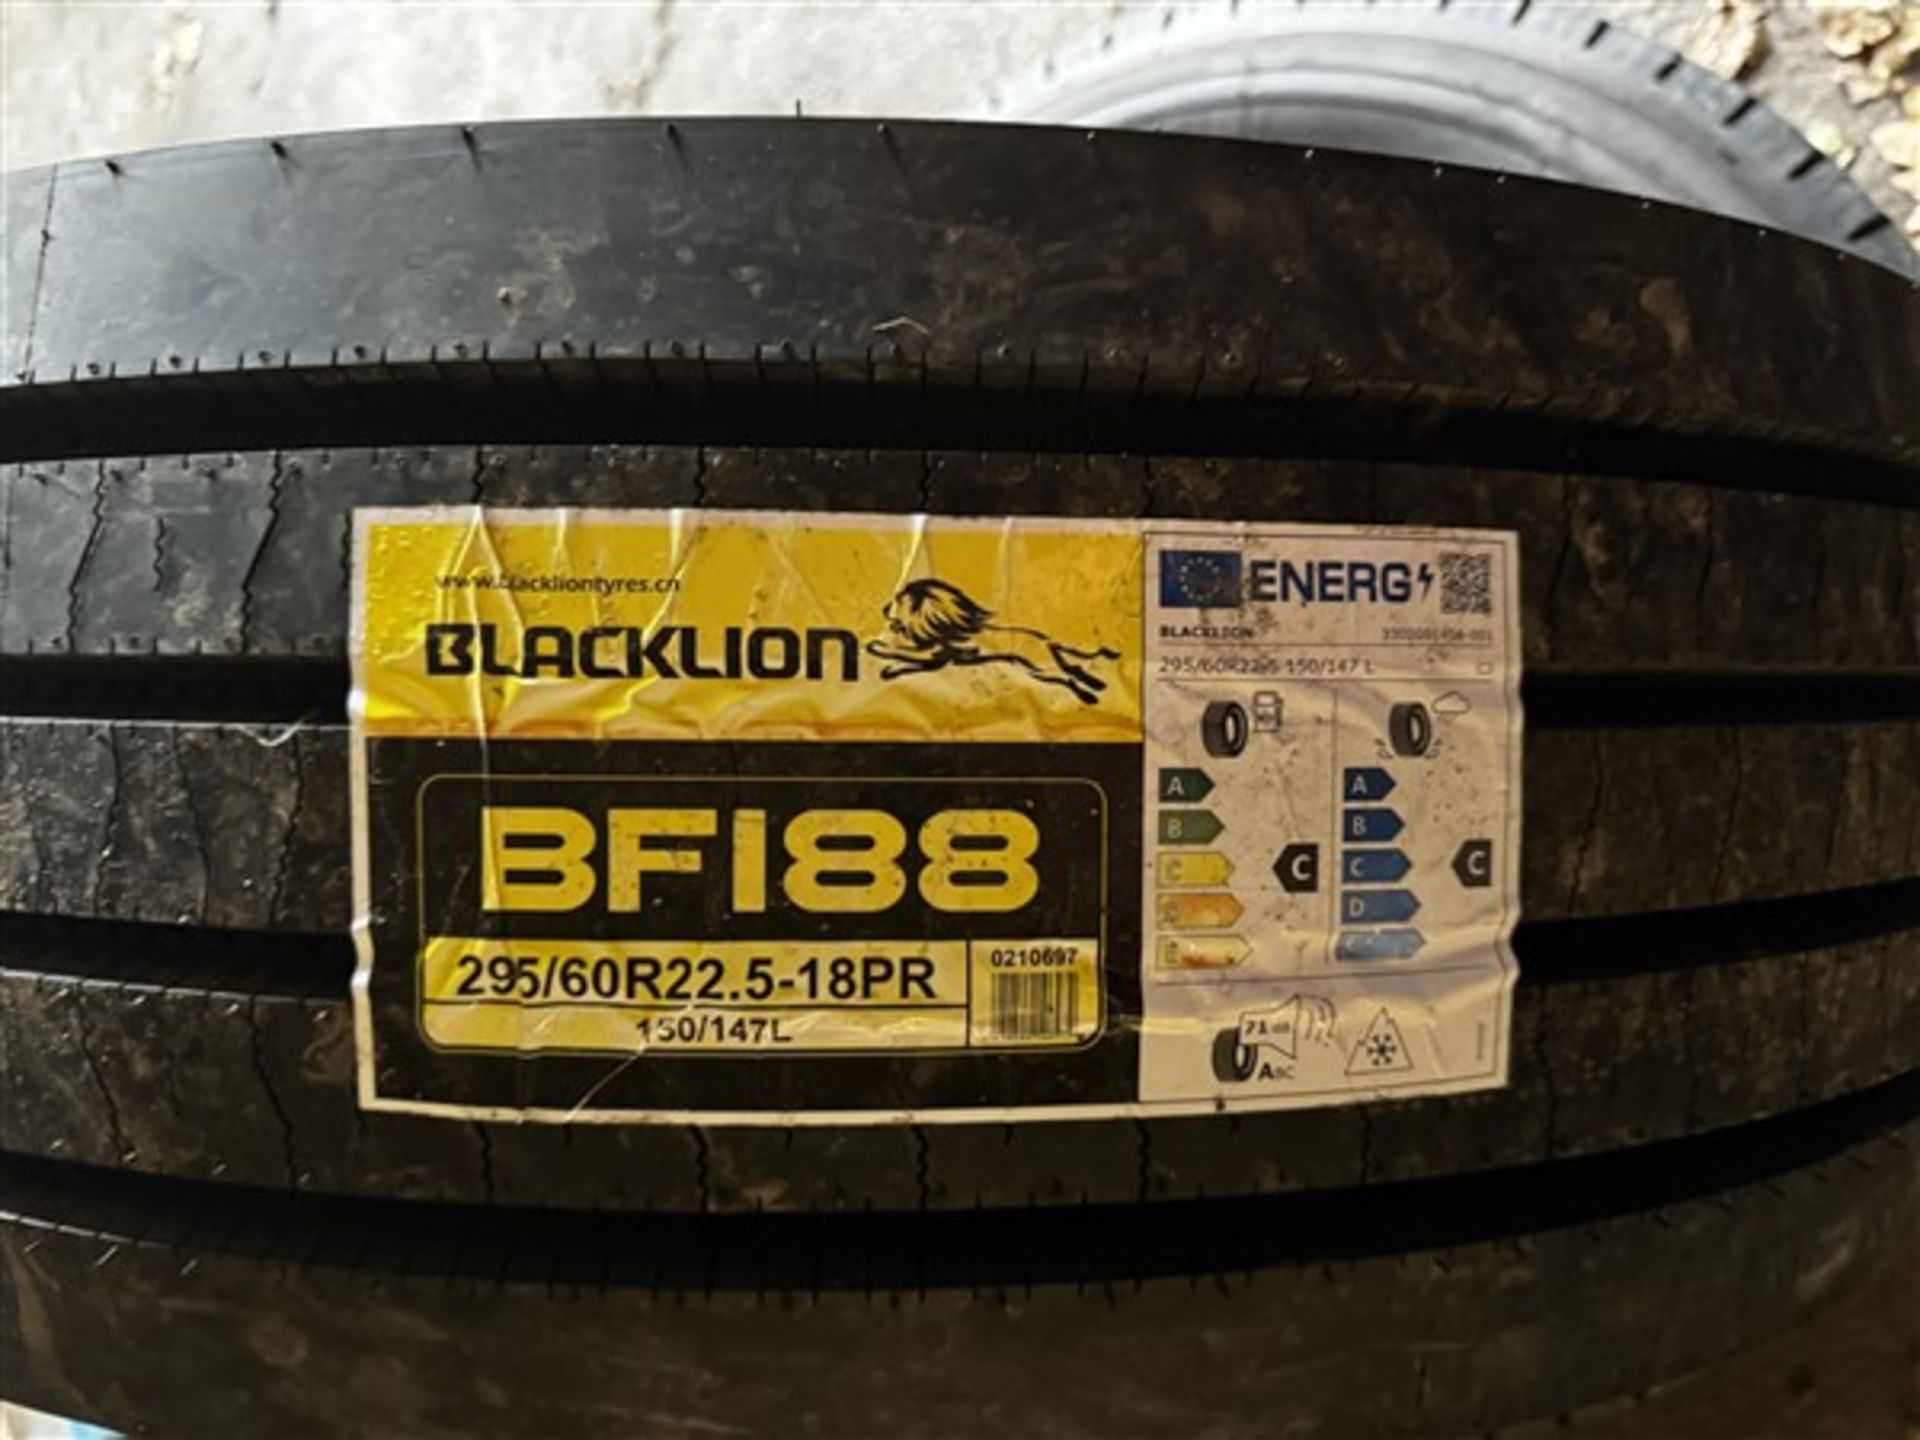 x1 BlackLion BF188 Tyre Size: 295/60 R 22.5 & x1 Fullrun TB755 Tyre Size: 315/70 R 22.5 *N.B. This - Image 2 of 3